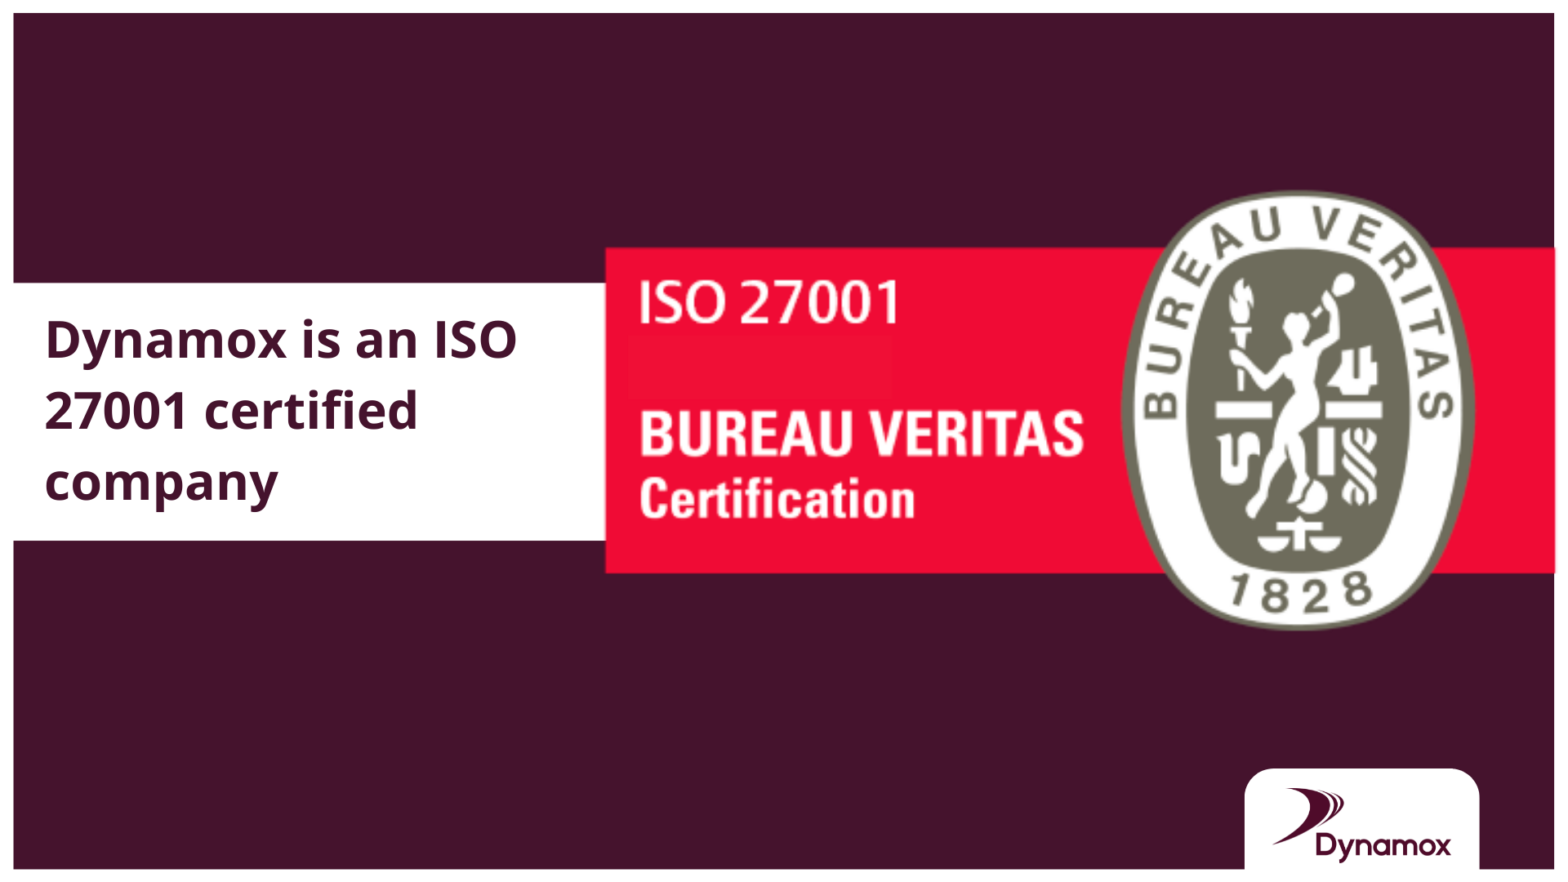 Dynamox is an ISO 27001 certified company